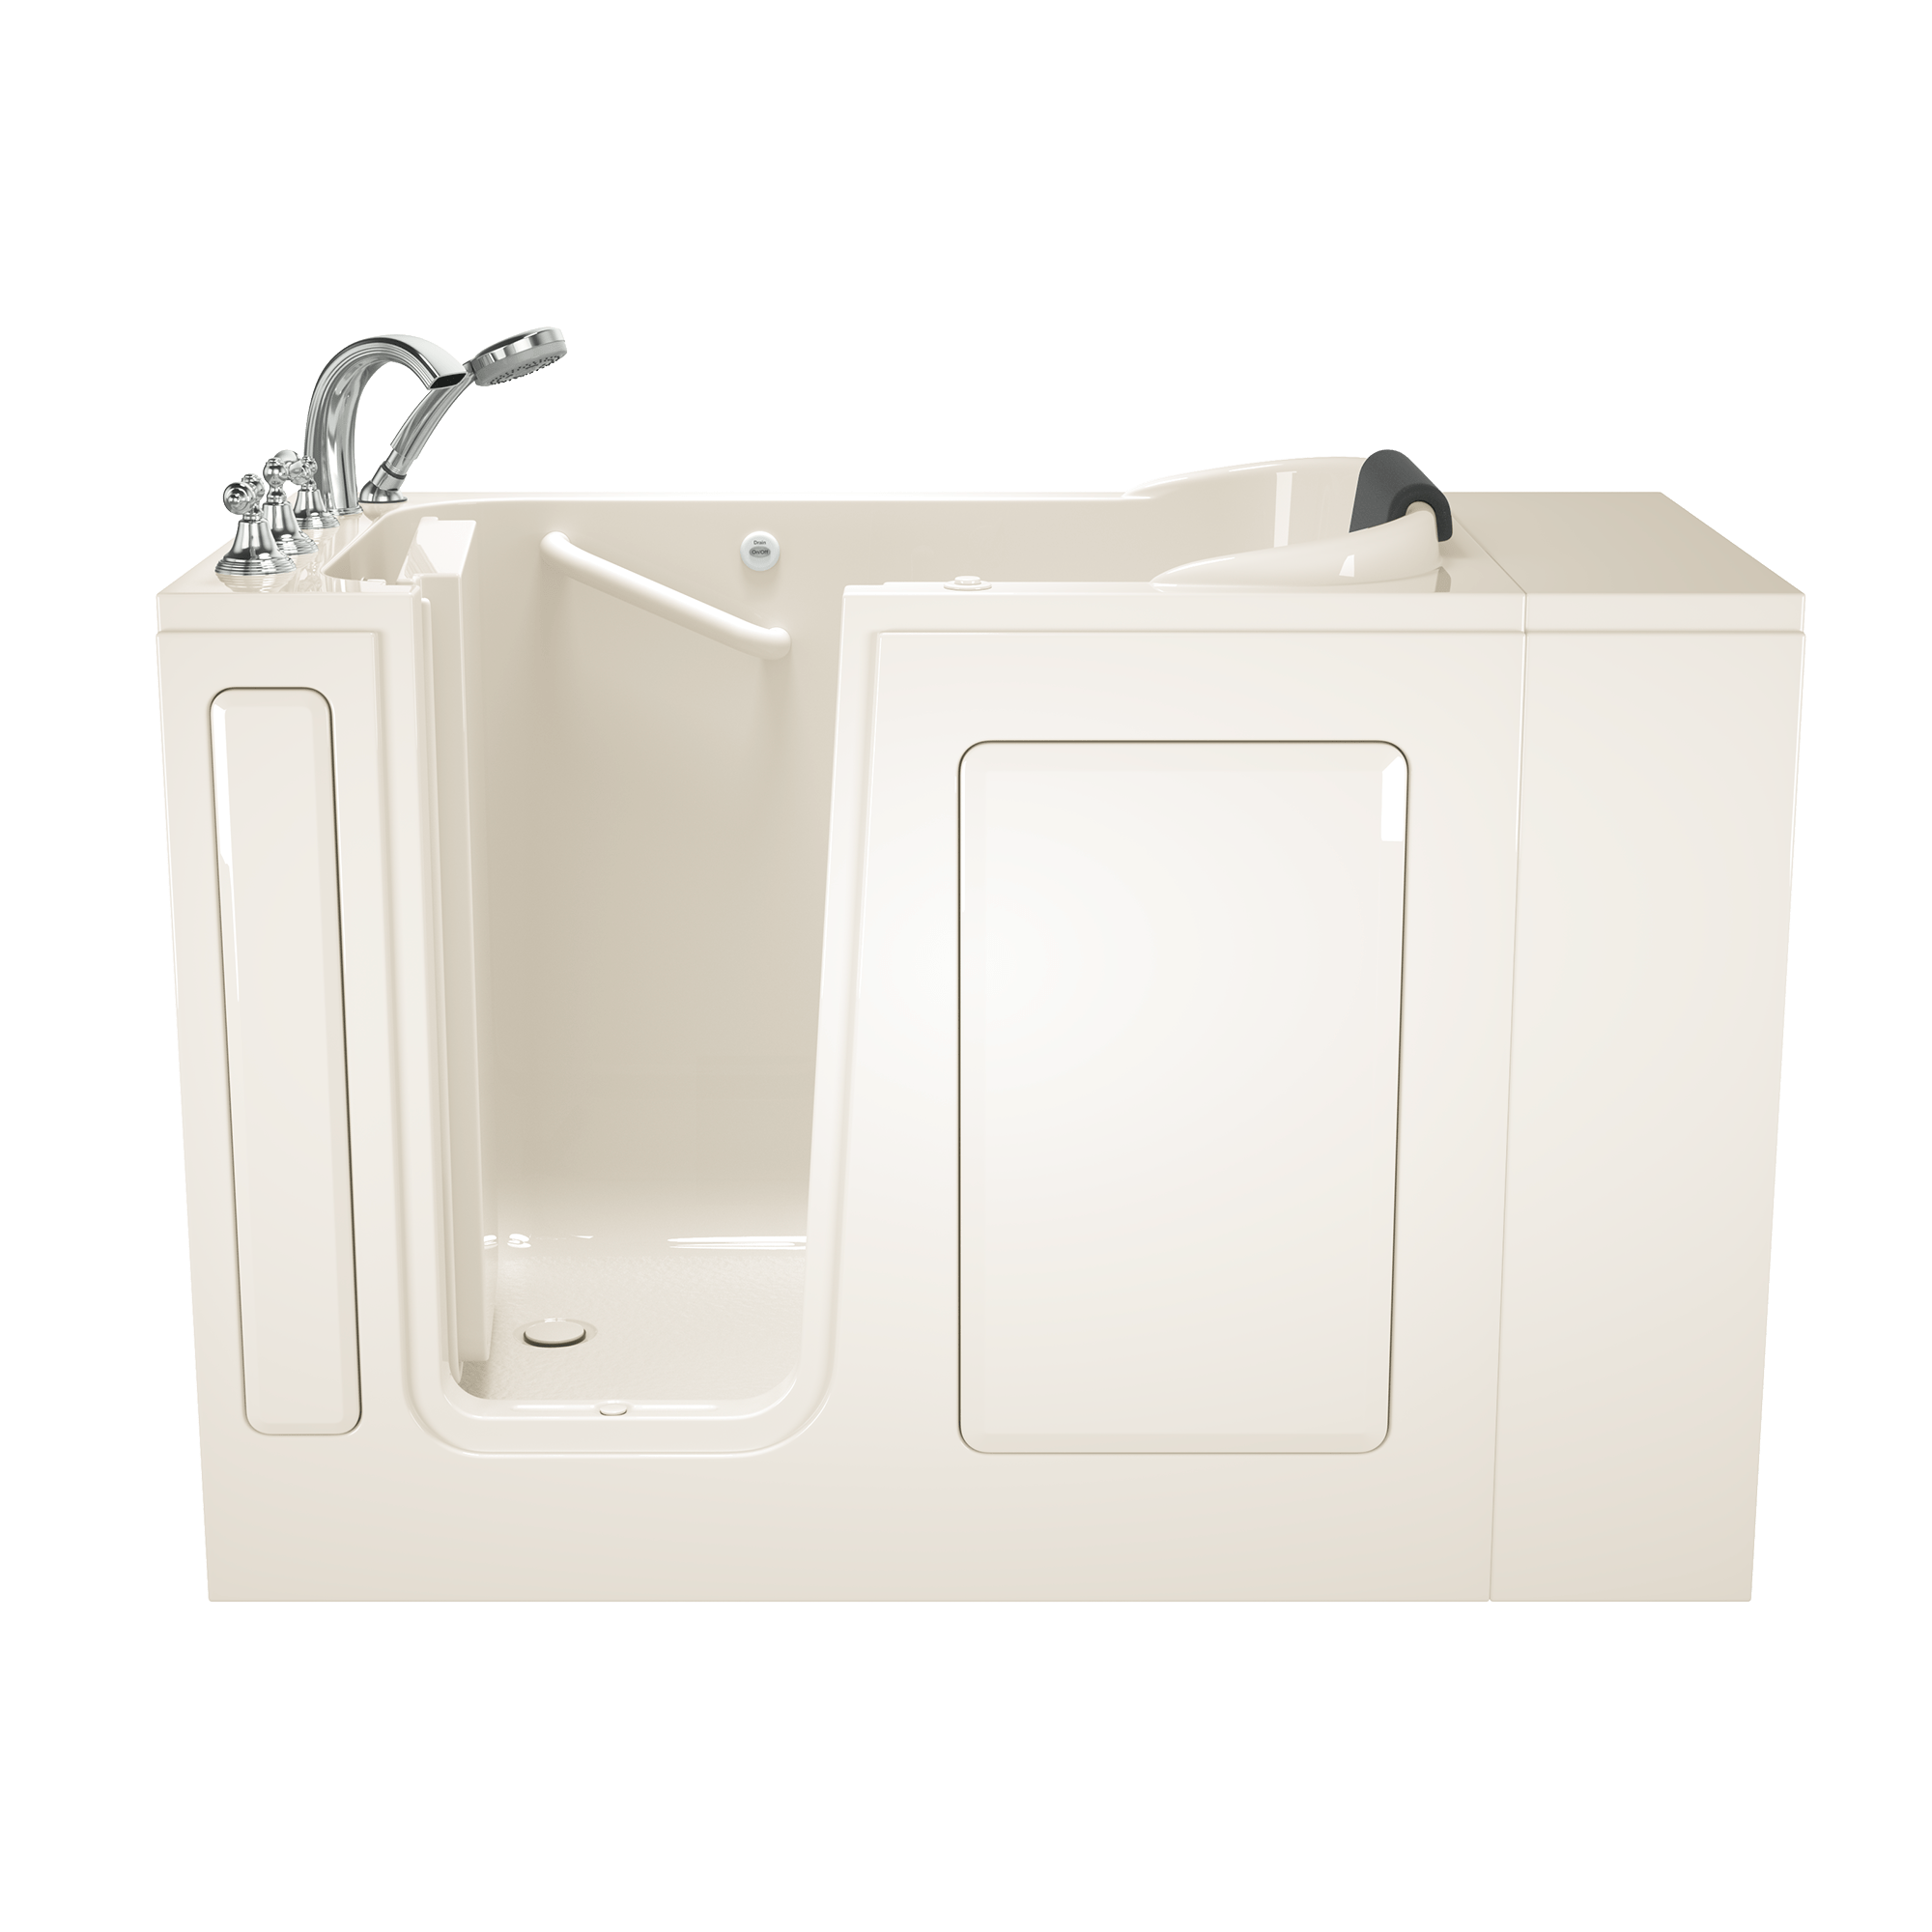 Gelcoat Premium Series 28 x 48 Inch Walk in Tub With Whirlpool System   Left Hand Drain With Faucet WIB LINEN